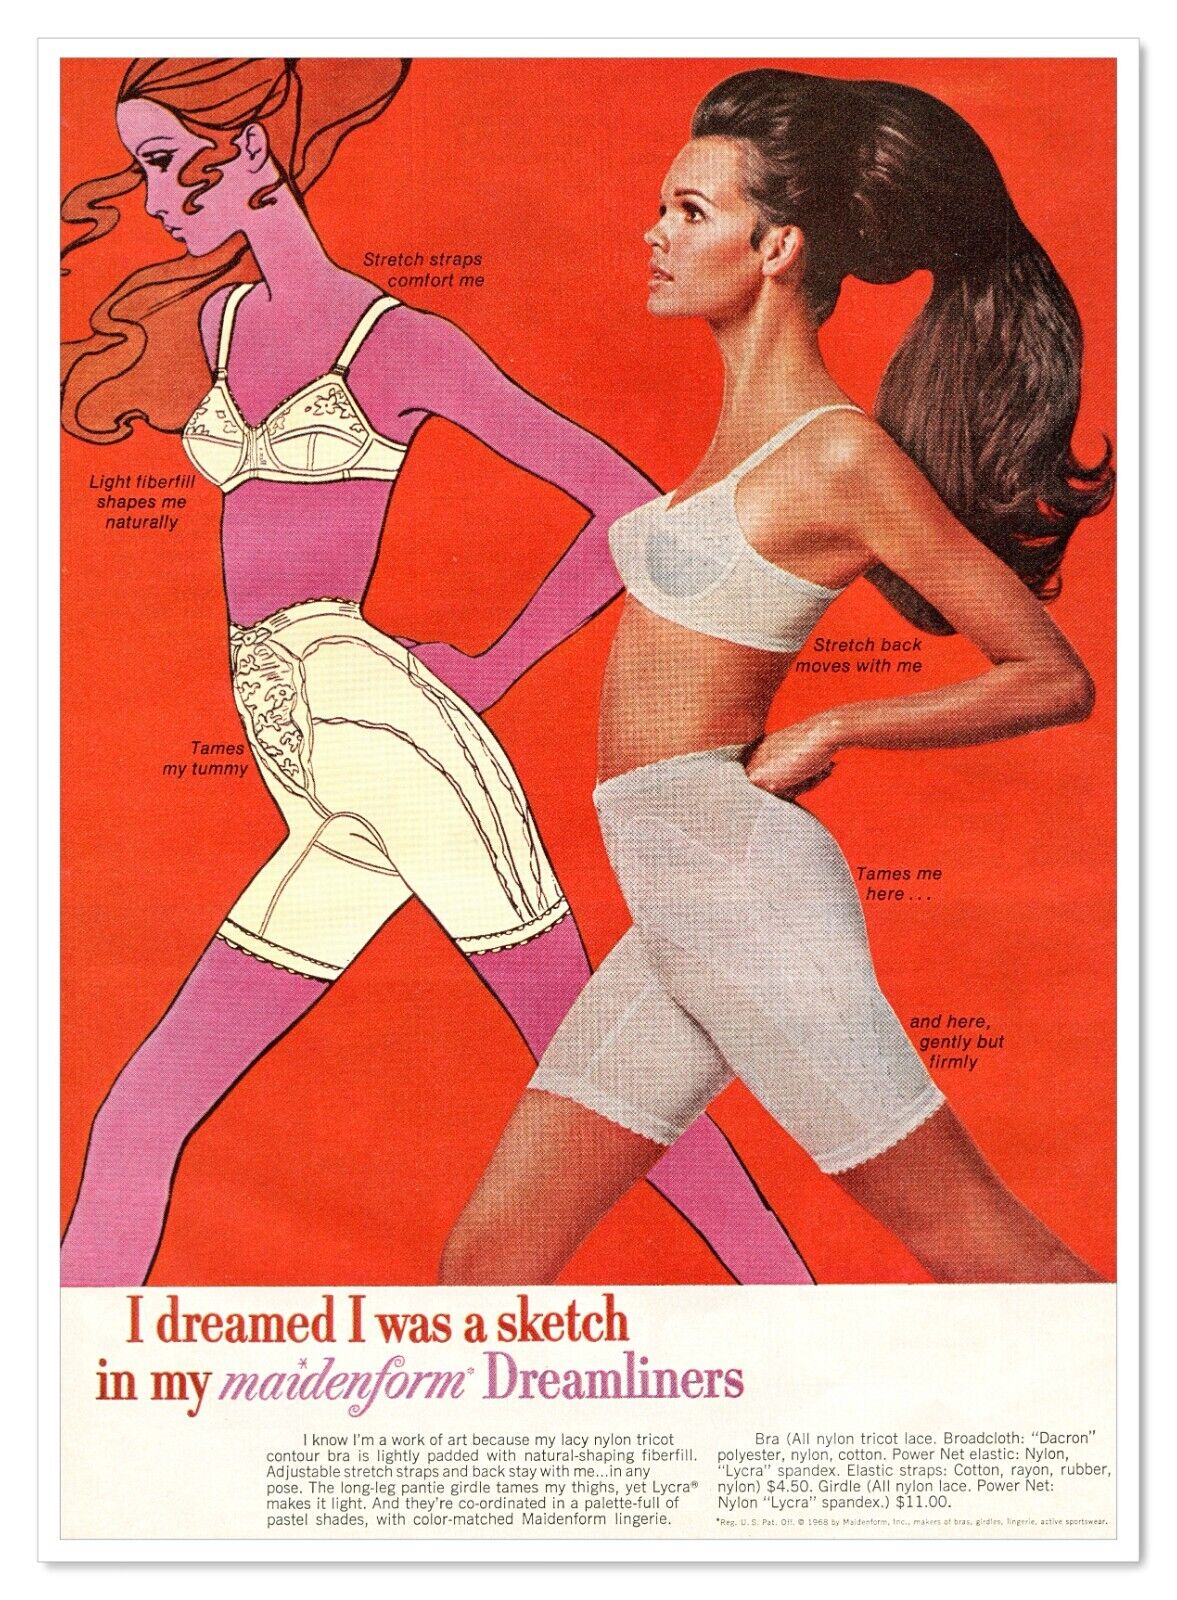 Maidenform Dreamliners Dreamed I Was a Sketch Vintage 1968 Full-Page Magazine Ad